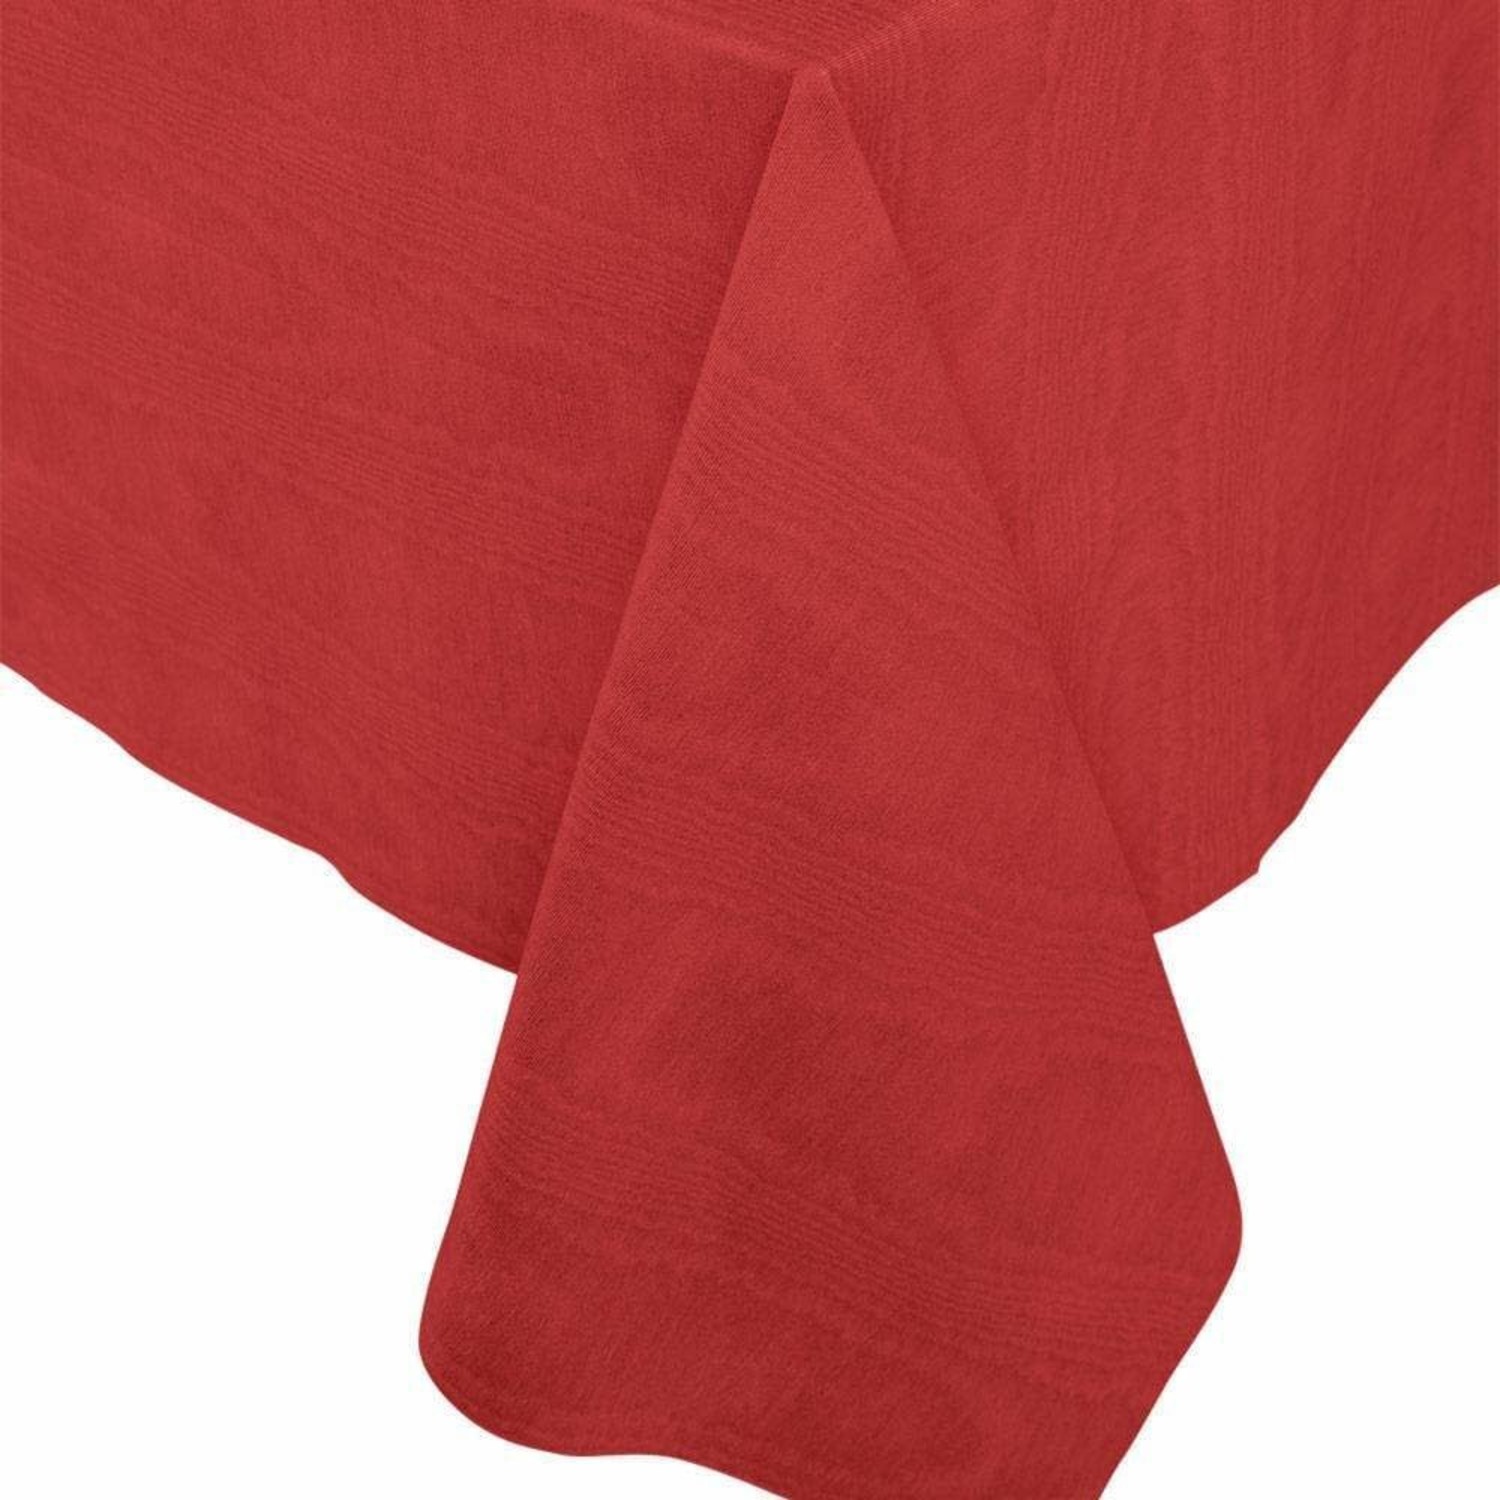 4.5x7' Red Paper Tablecloth - Whisk